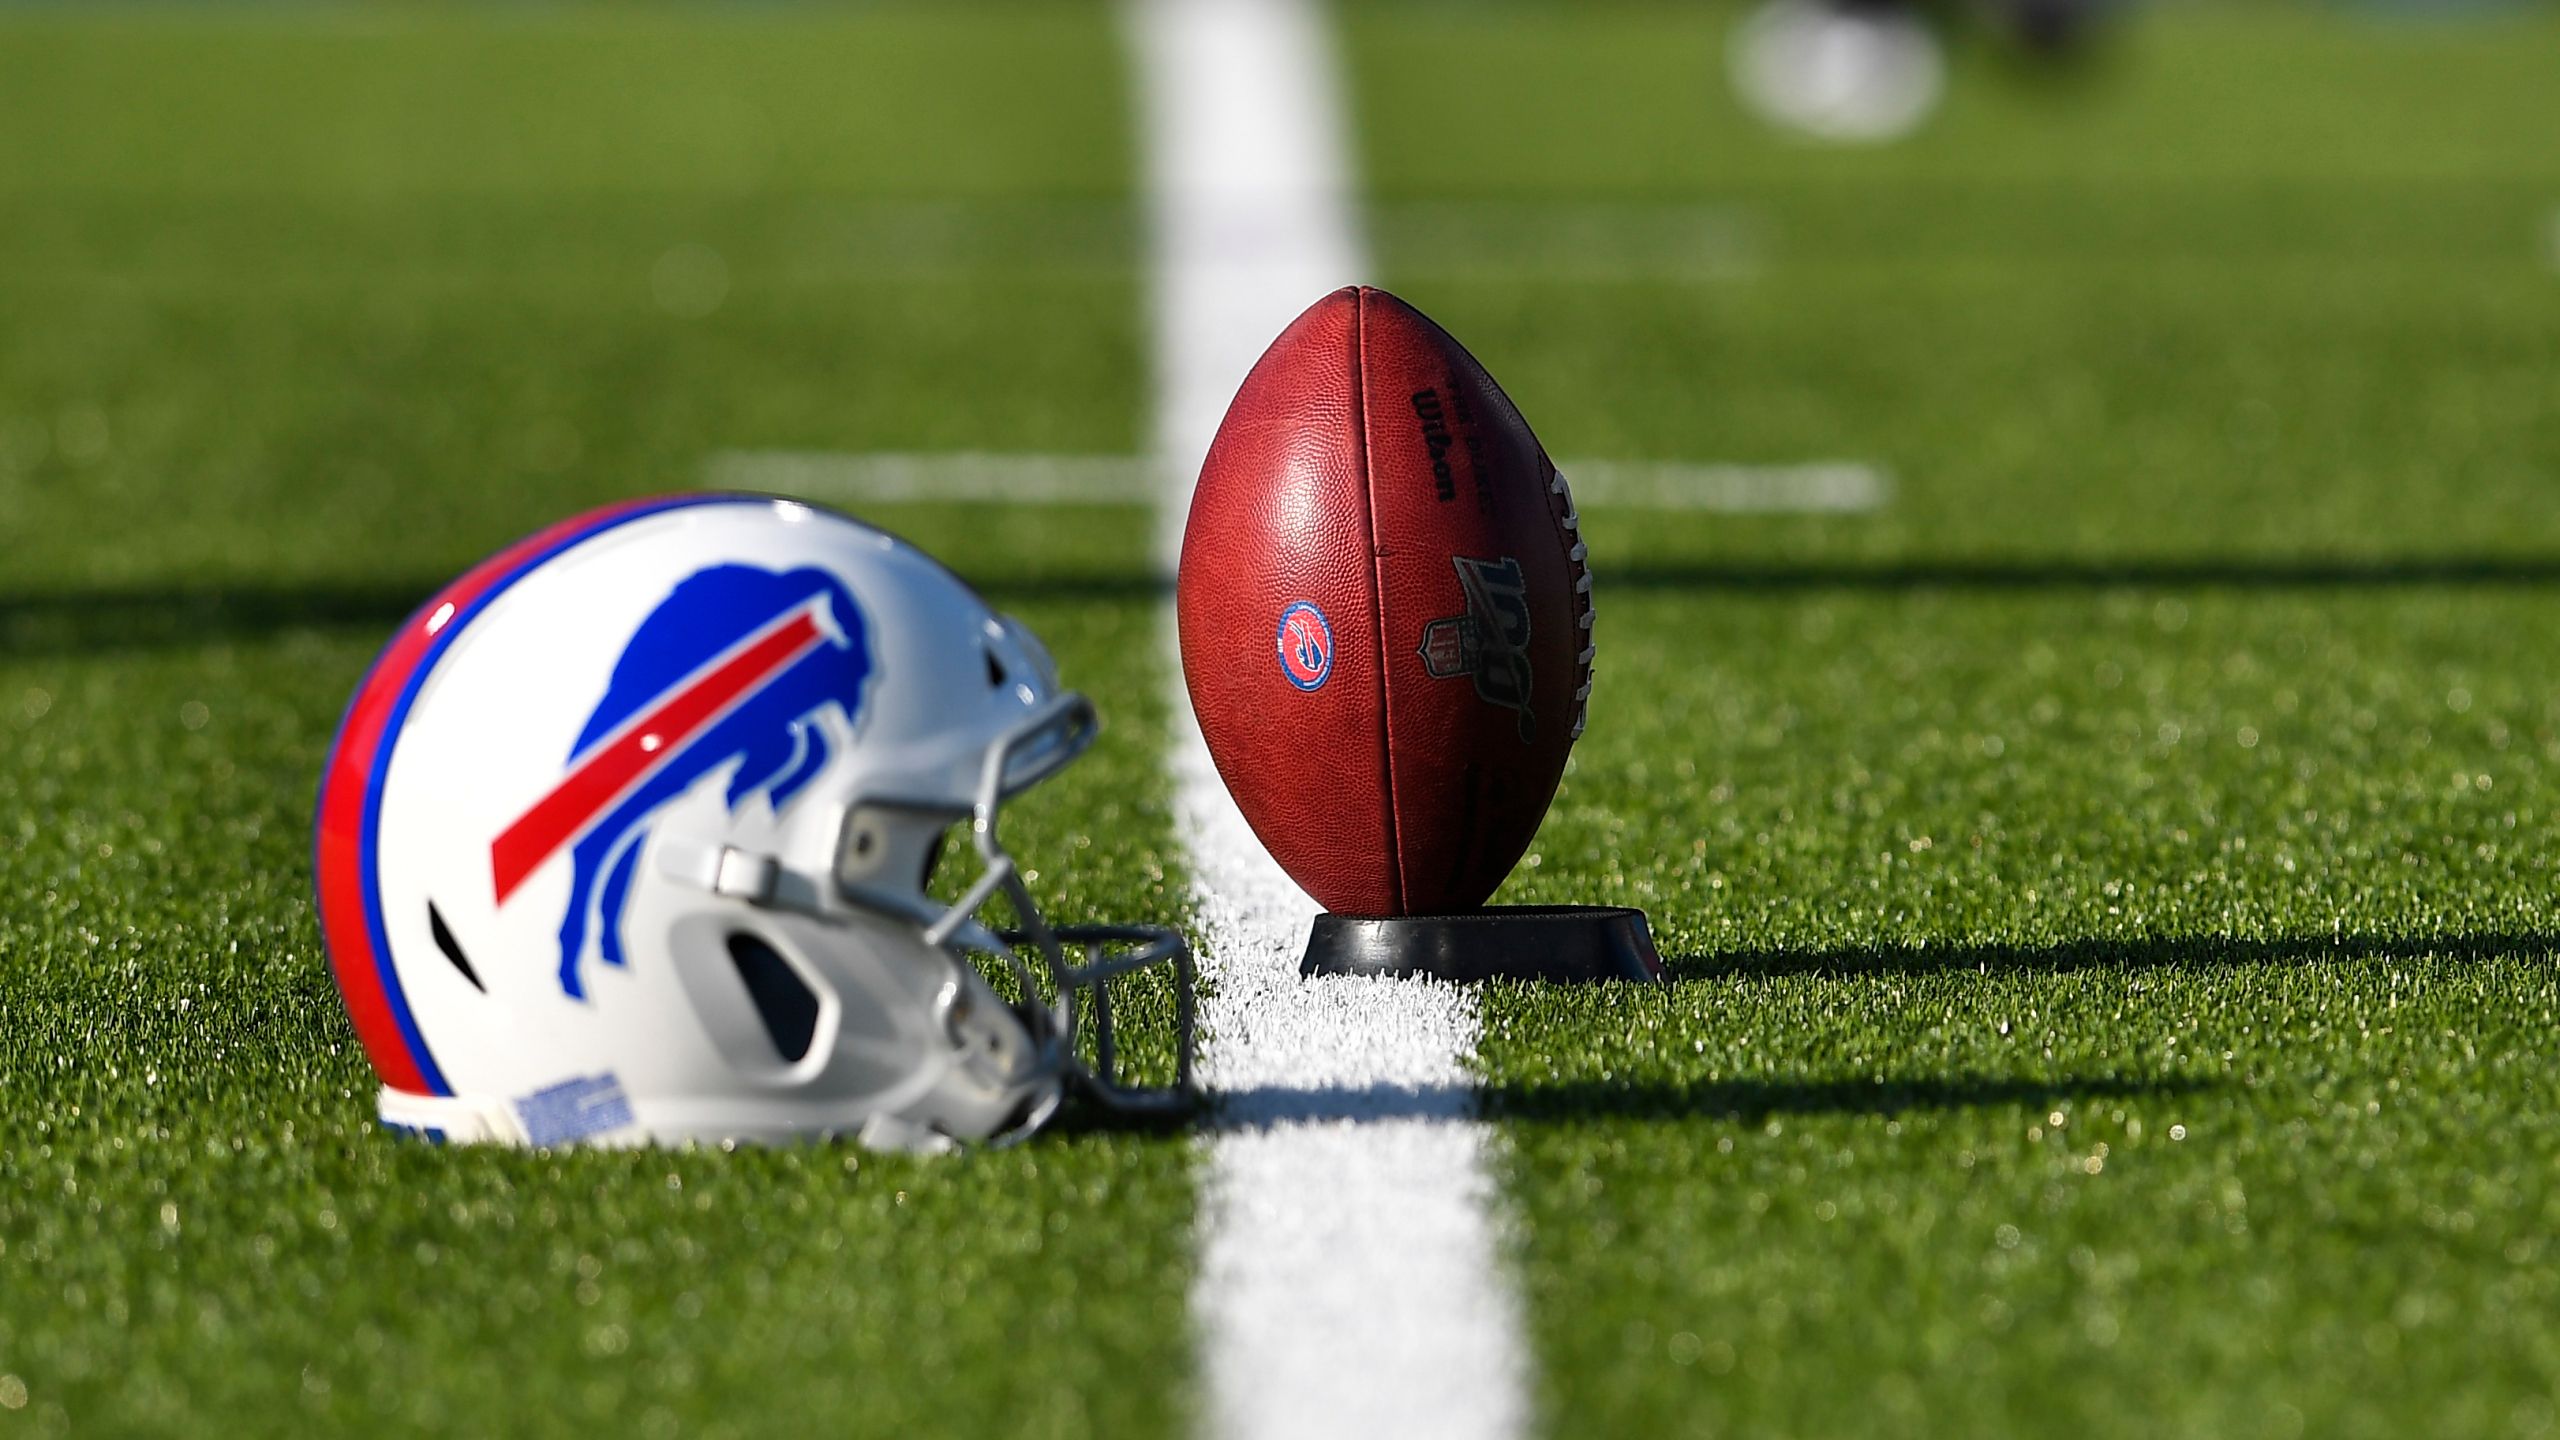 Bills 2021 schedule includes visits to Kansas City, New Orleans and Tampa Bay. News 4 Buffalo